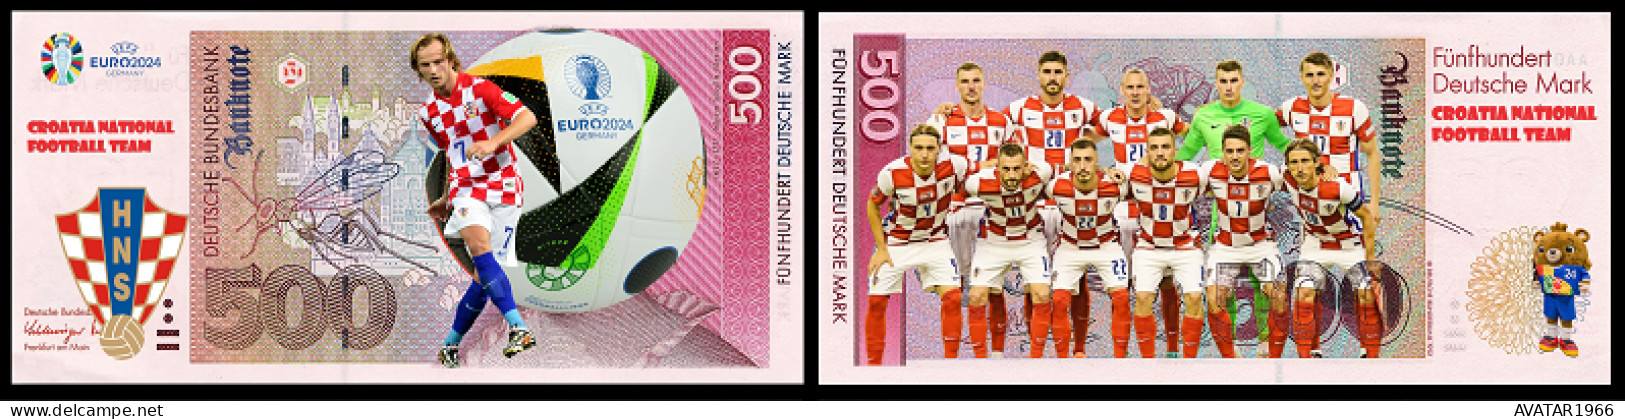 UEFA European Football Championship 2024 qualified country  Croatia 8 pieces Germany fantasy paper money